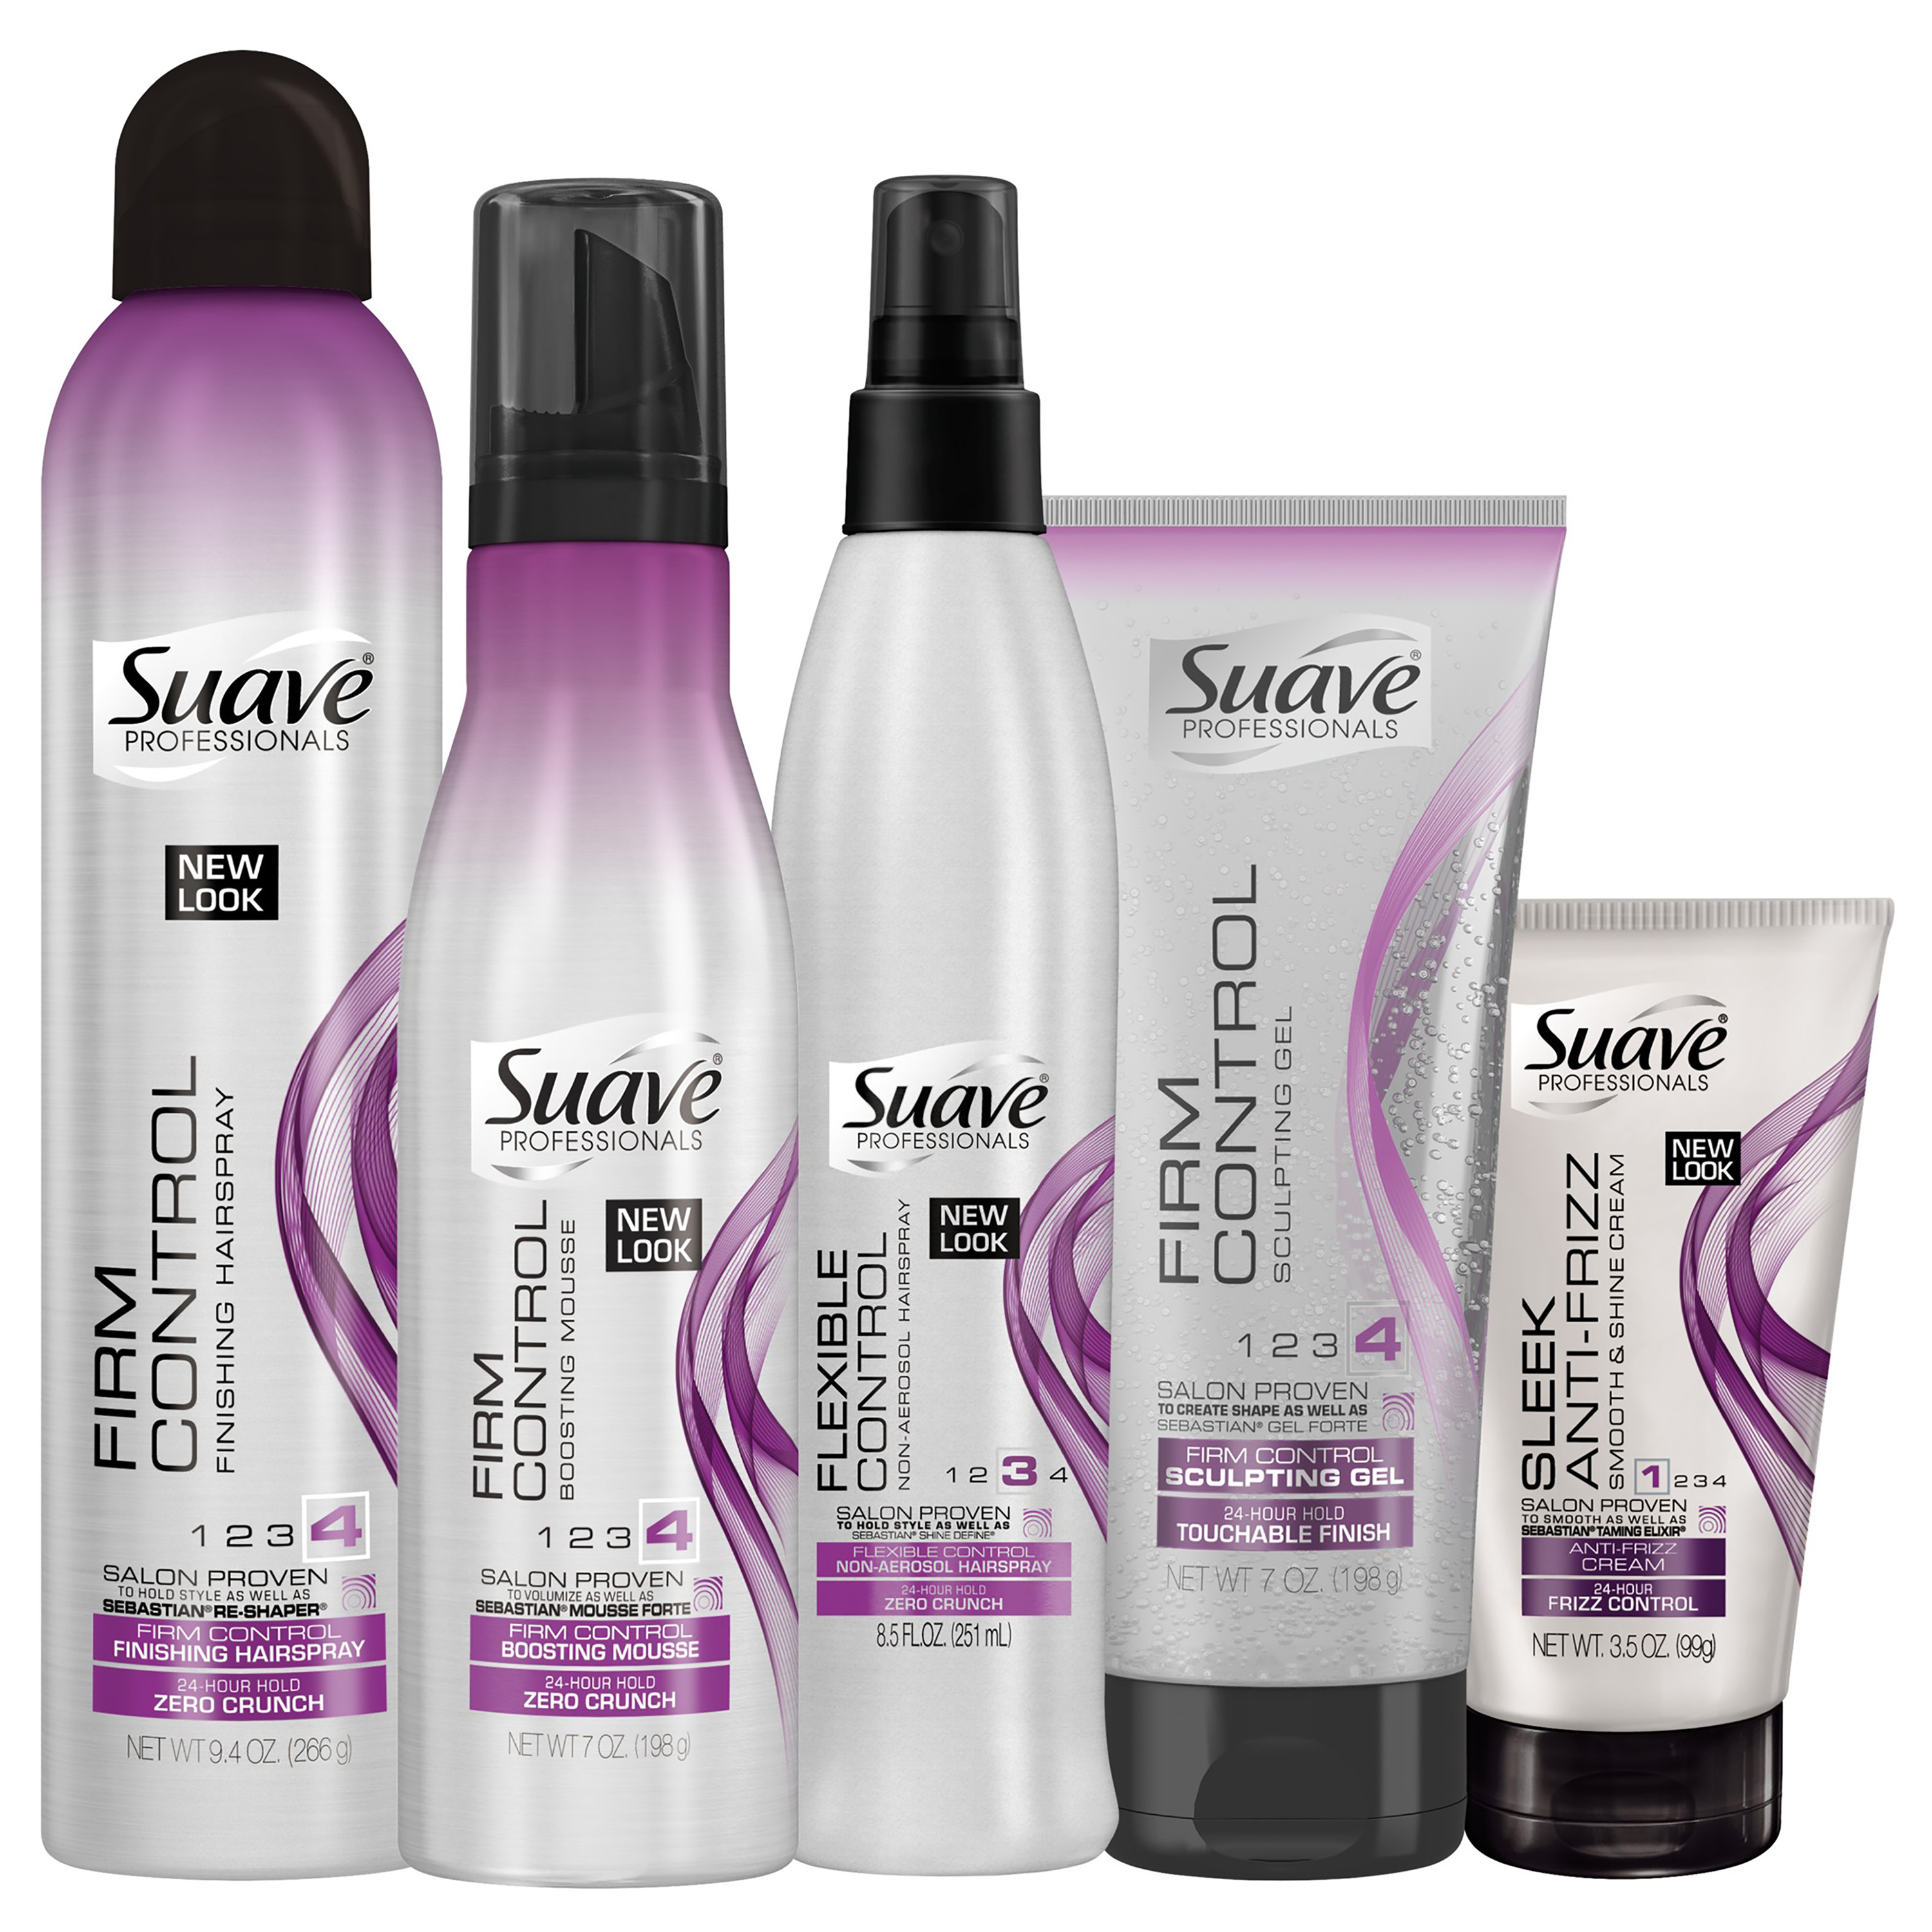 Suave Professionals Volumizing Spray Firm Control Boosting Hair Styling Mousse with Collagen, 7 oz - image 3 of 9